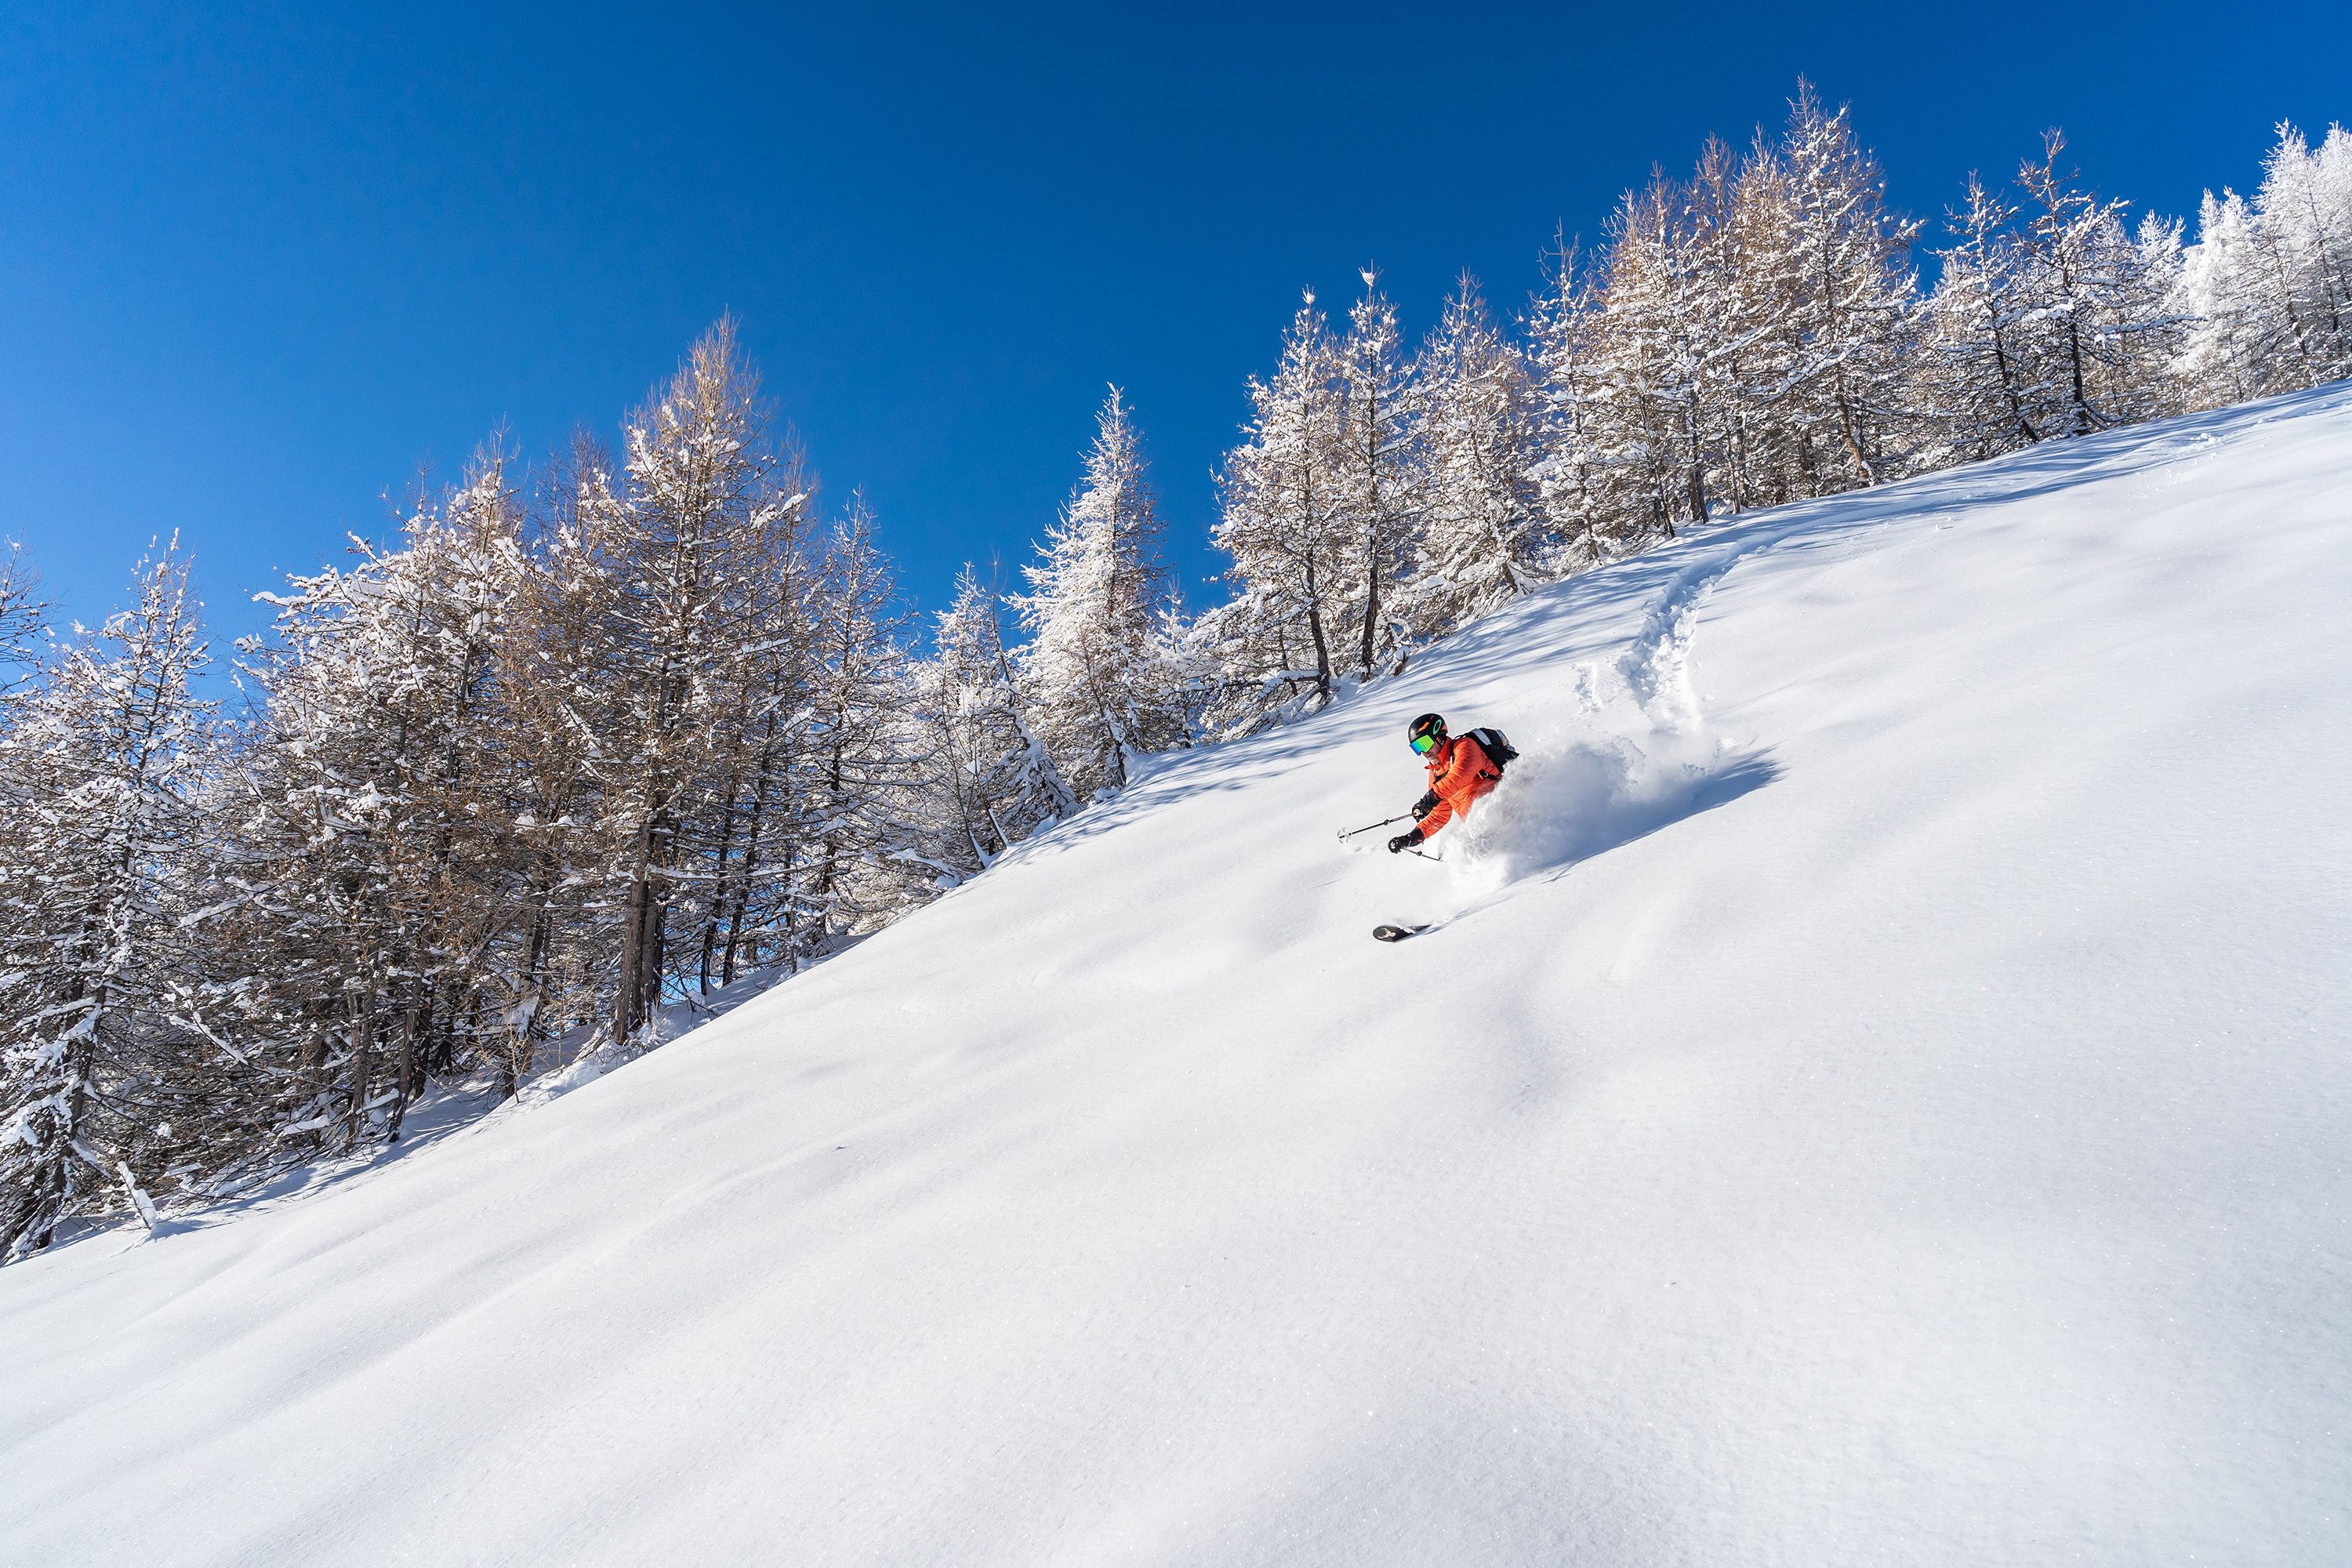 Deep powder on the slopes of Pelvoux